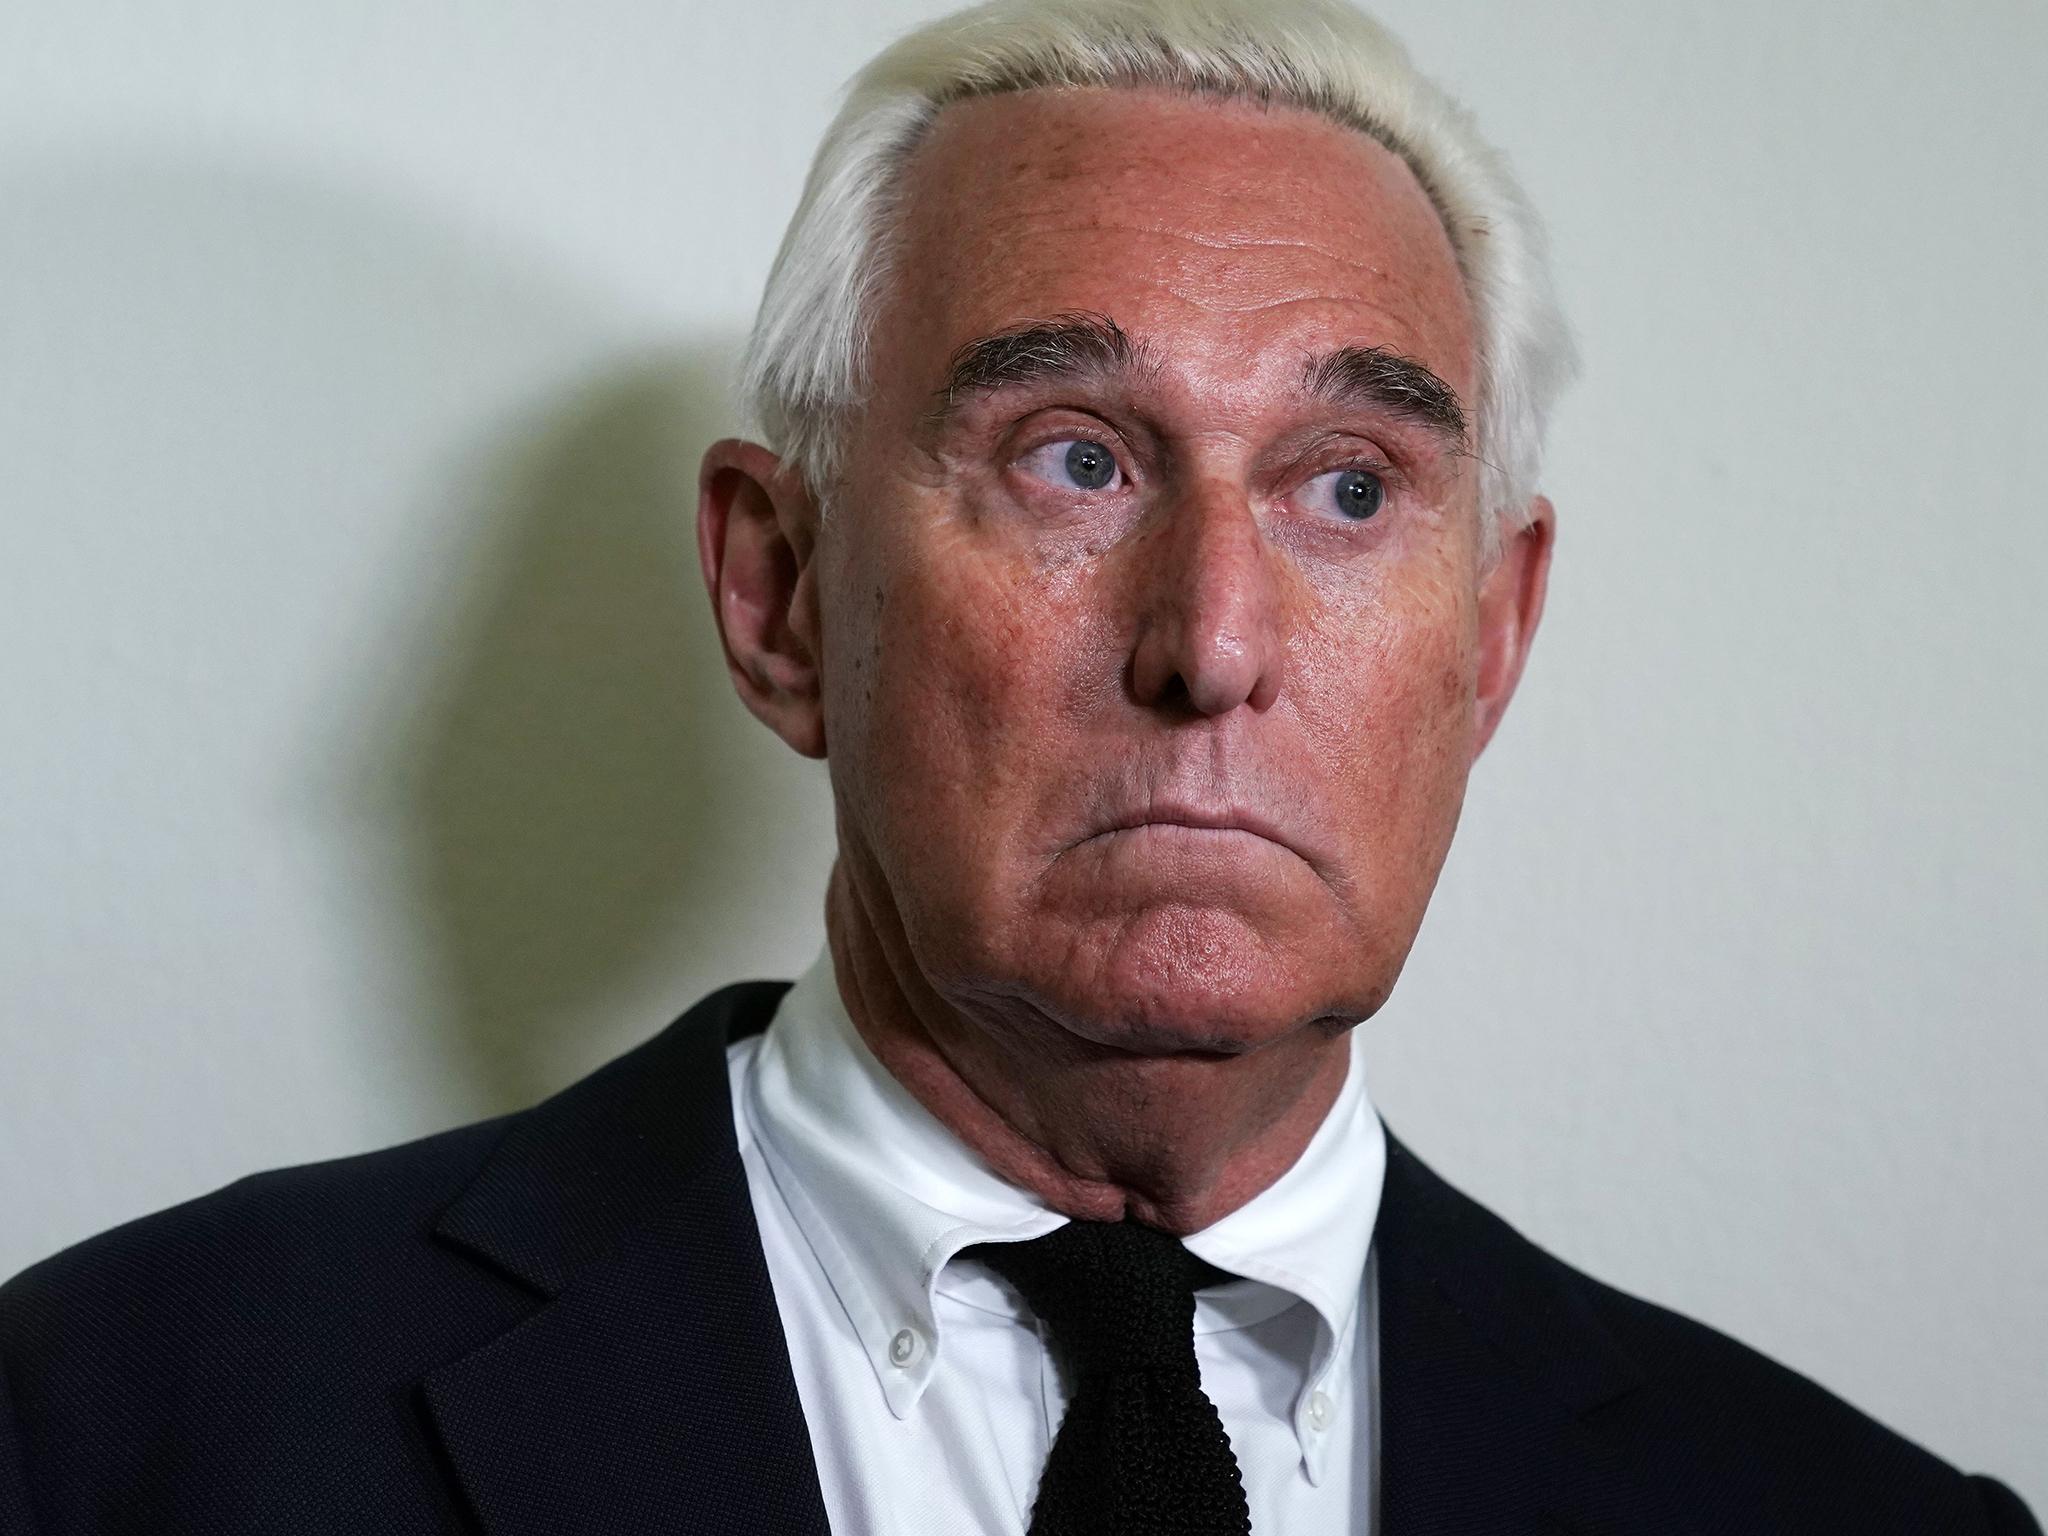 Roger Stone was the sixth associate of the president to be convicted in Robert Mueller's investigation